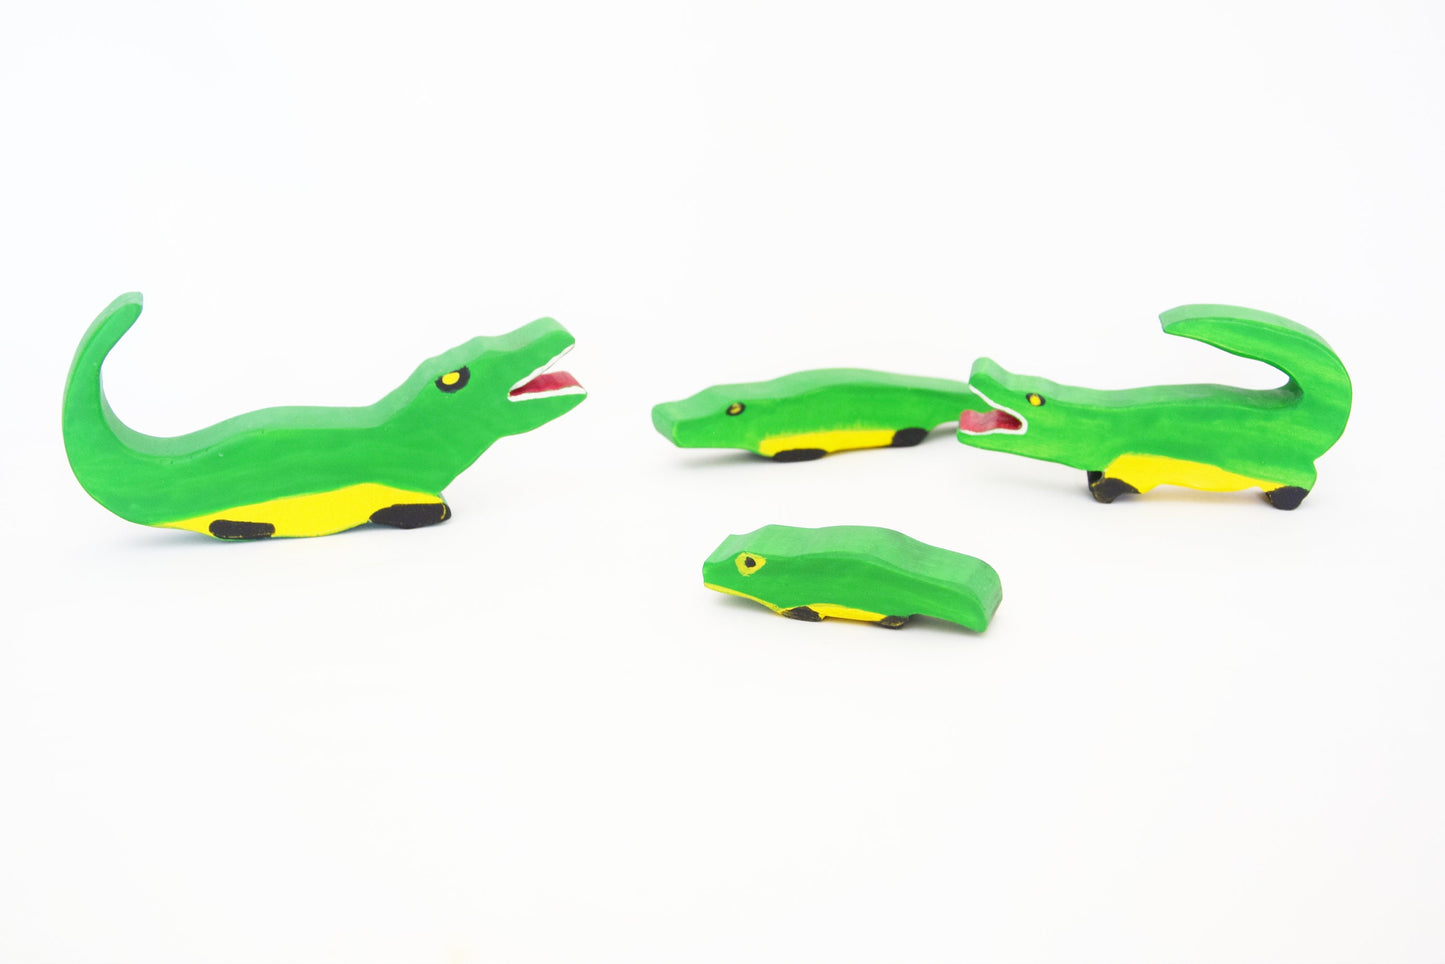 Wooden aligator toy set of four